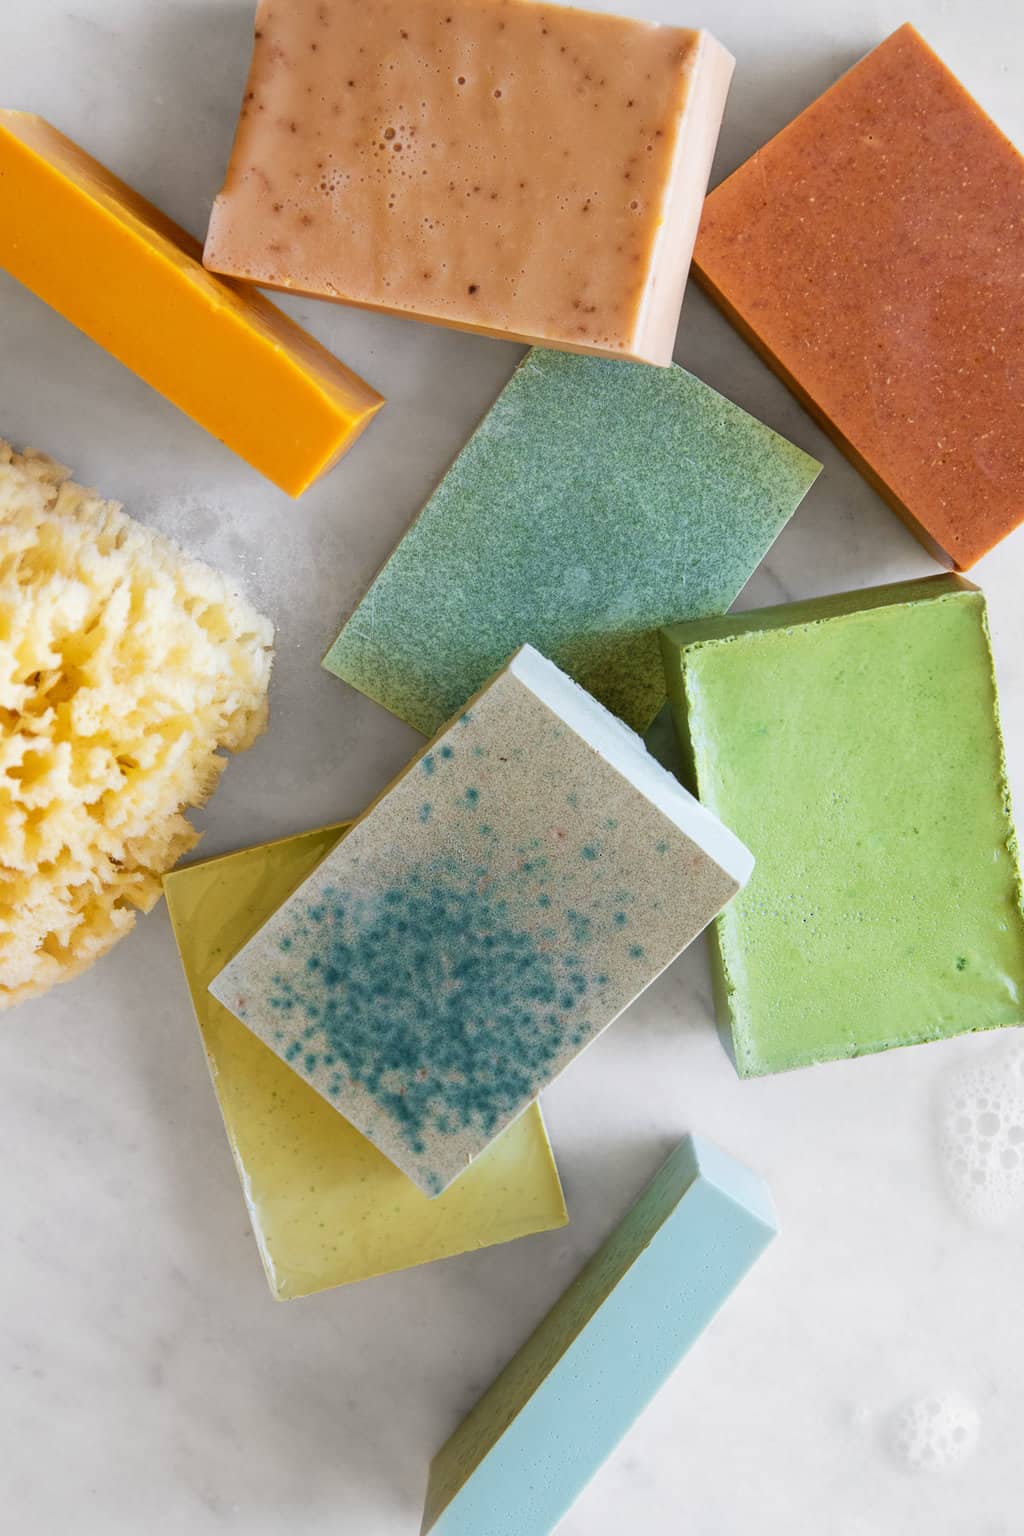 How to Color Soap: 56 Natural Ways To Make The Prettiest Homemade